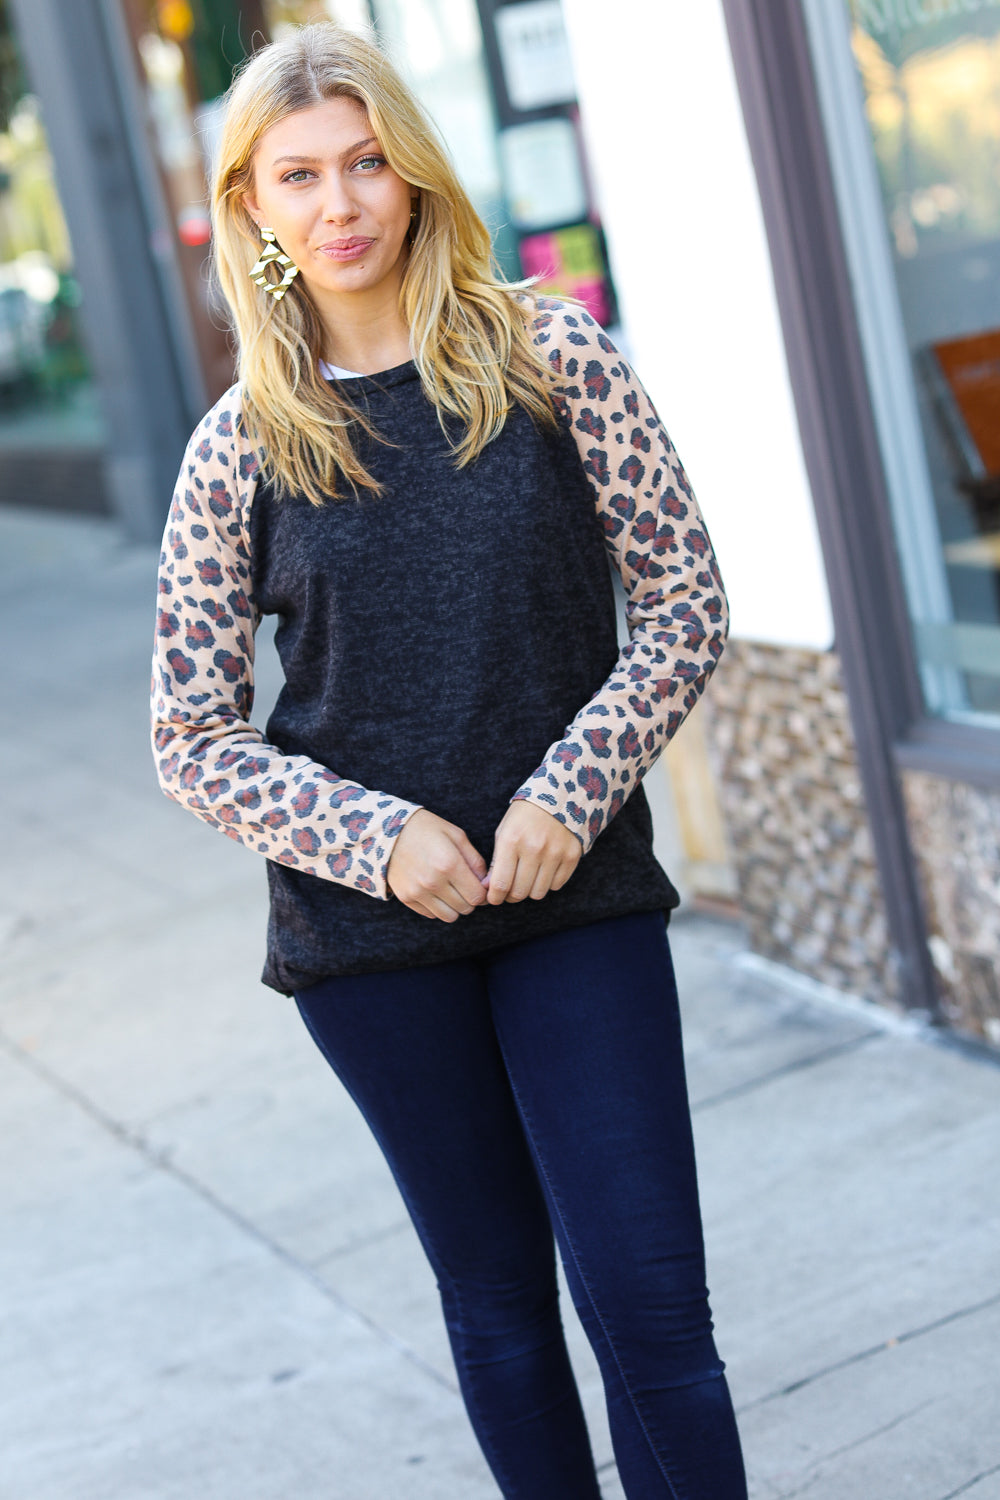 Smooth Sailing - Leopard-Sleeve Sweater Top